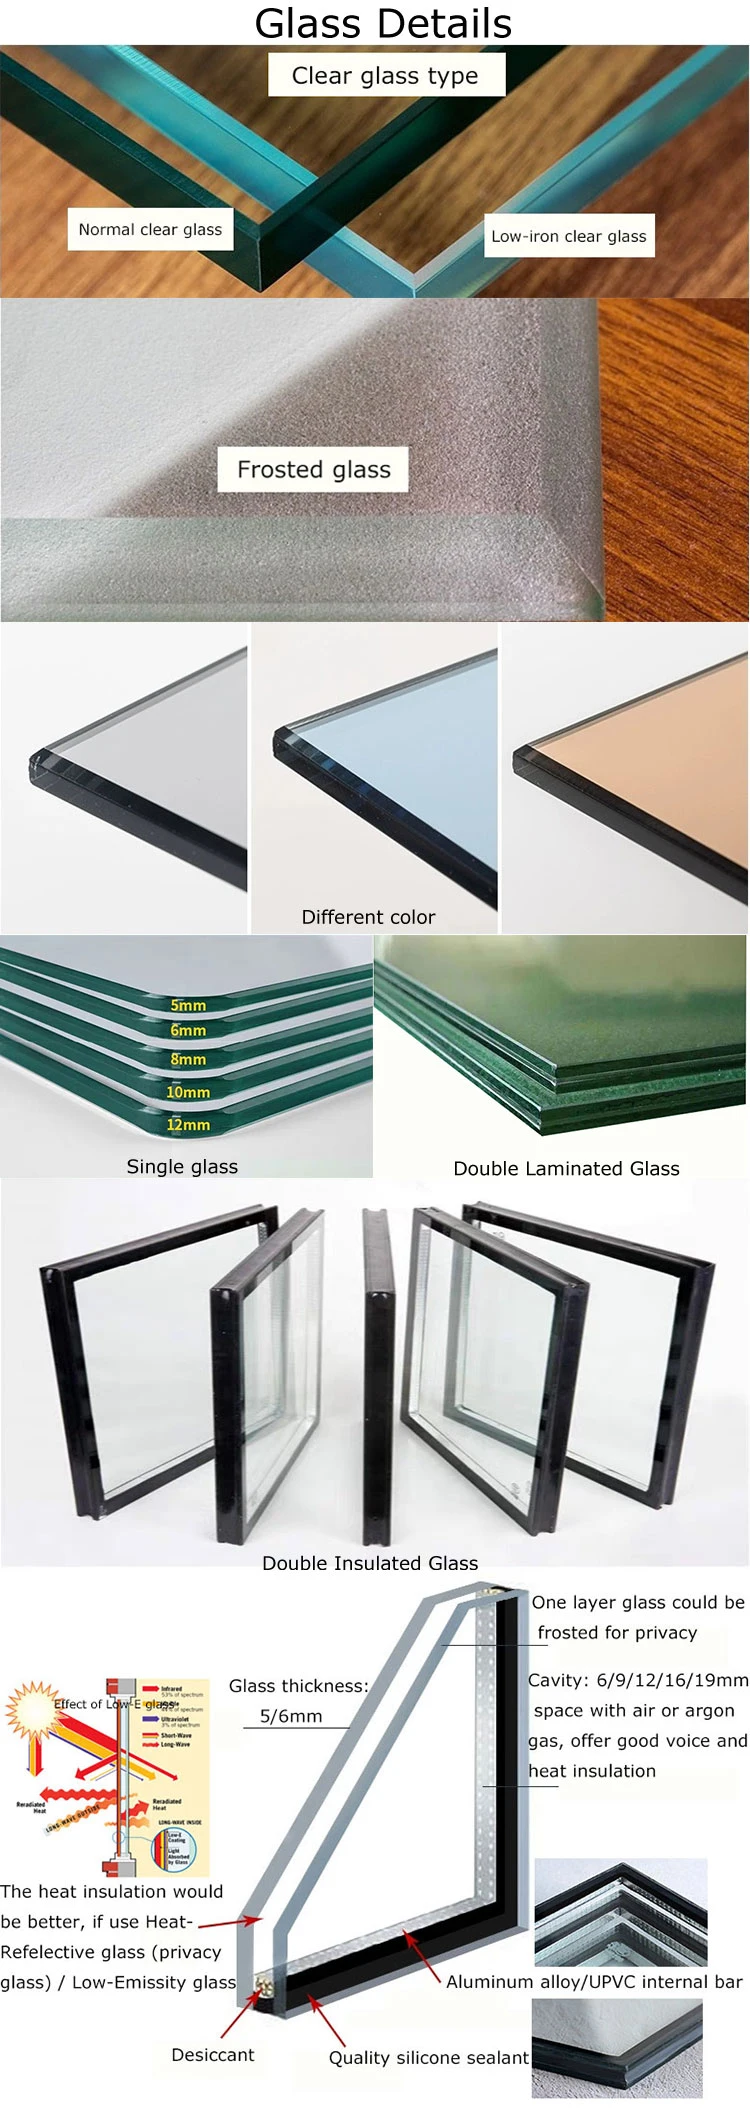 Superior Sound Heat Insulation Performance Double Tempered Clear UPVC Profile Fixed Window